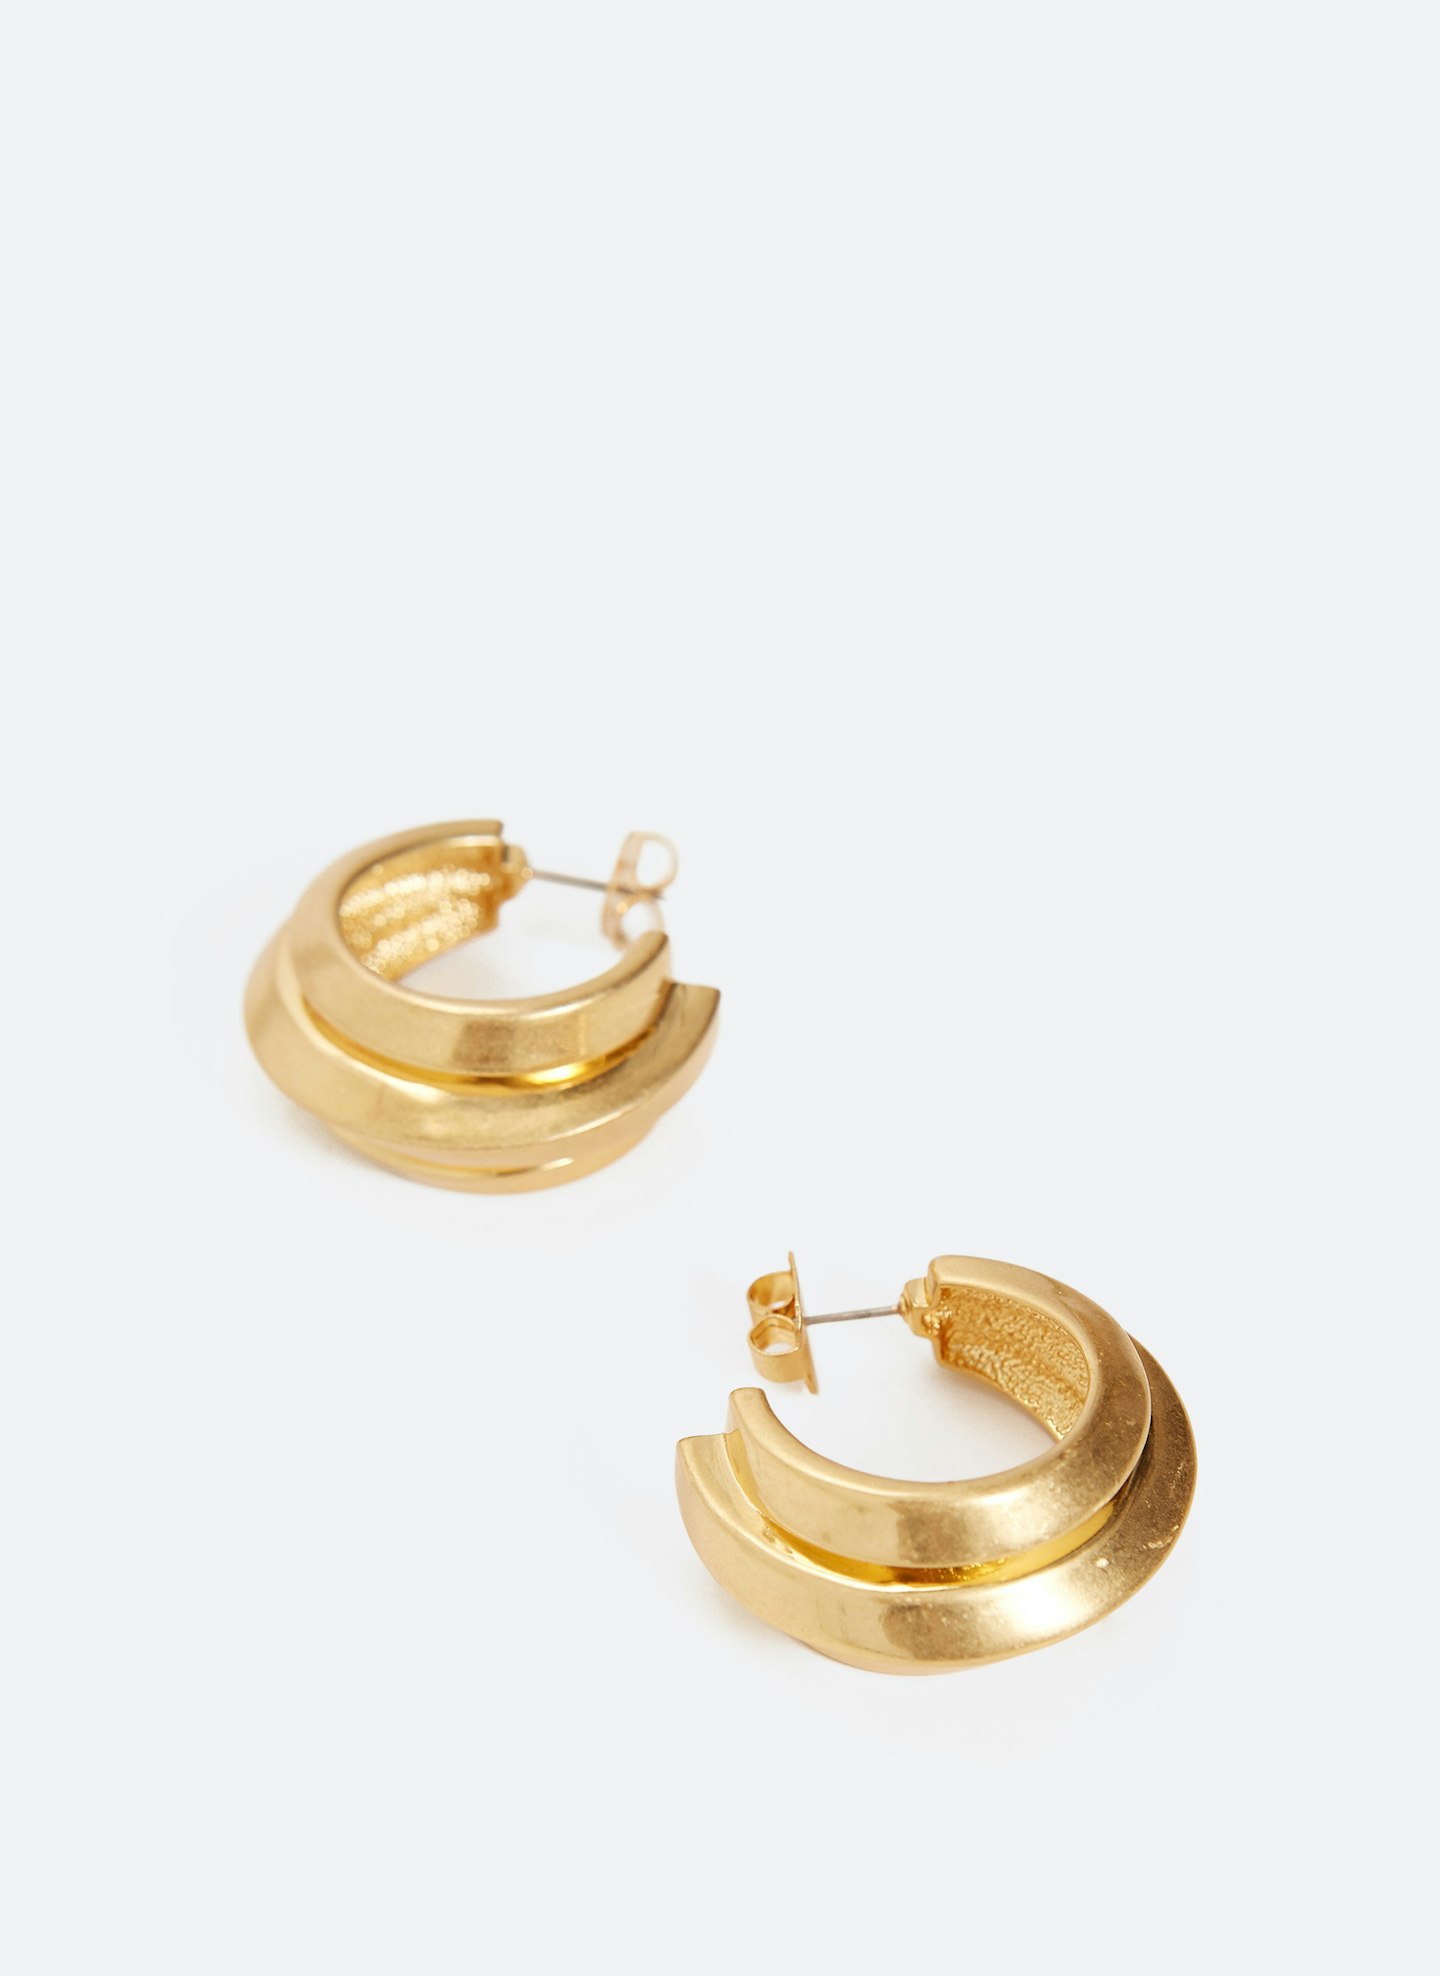 Uterque, Gold-Toned Earrings, £49